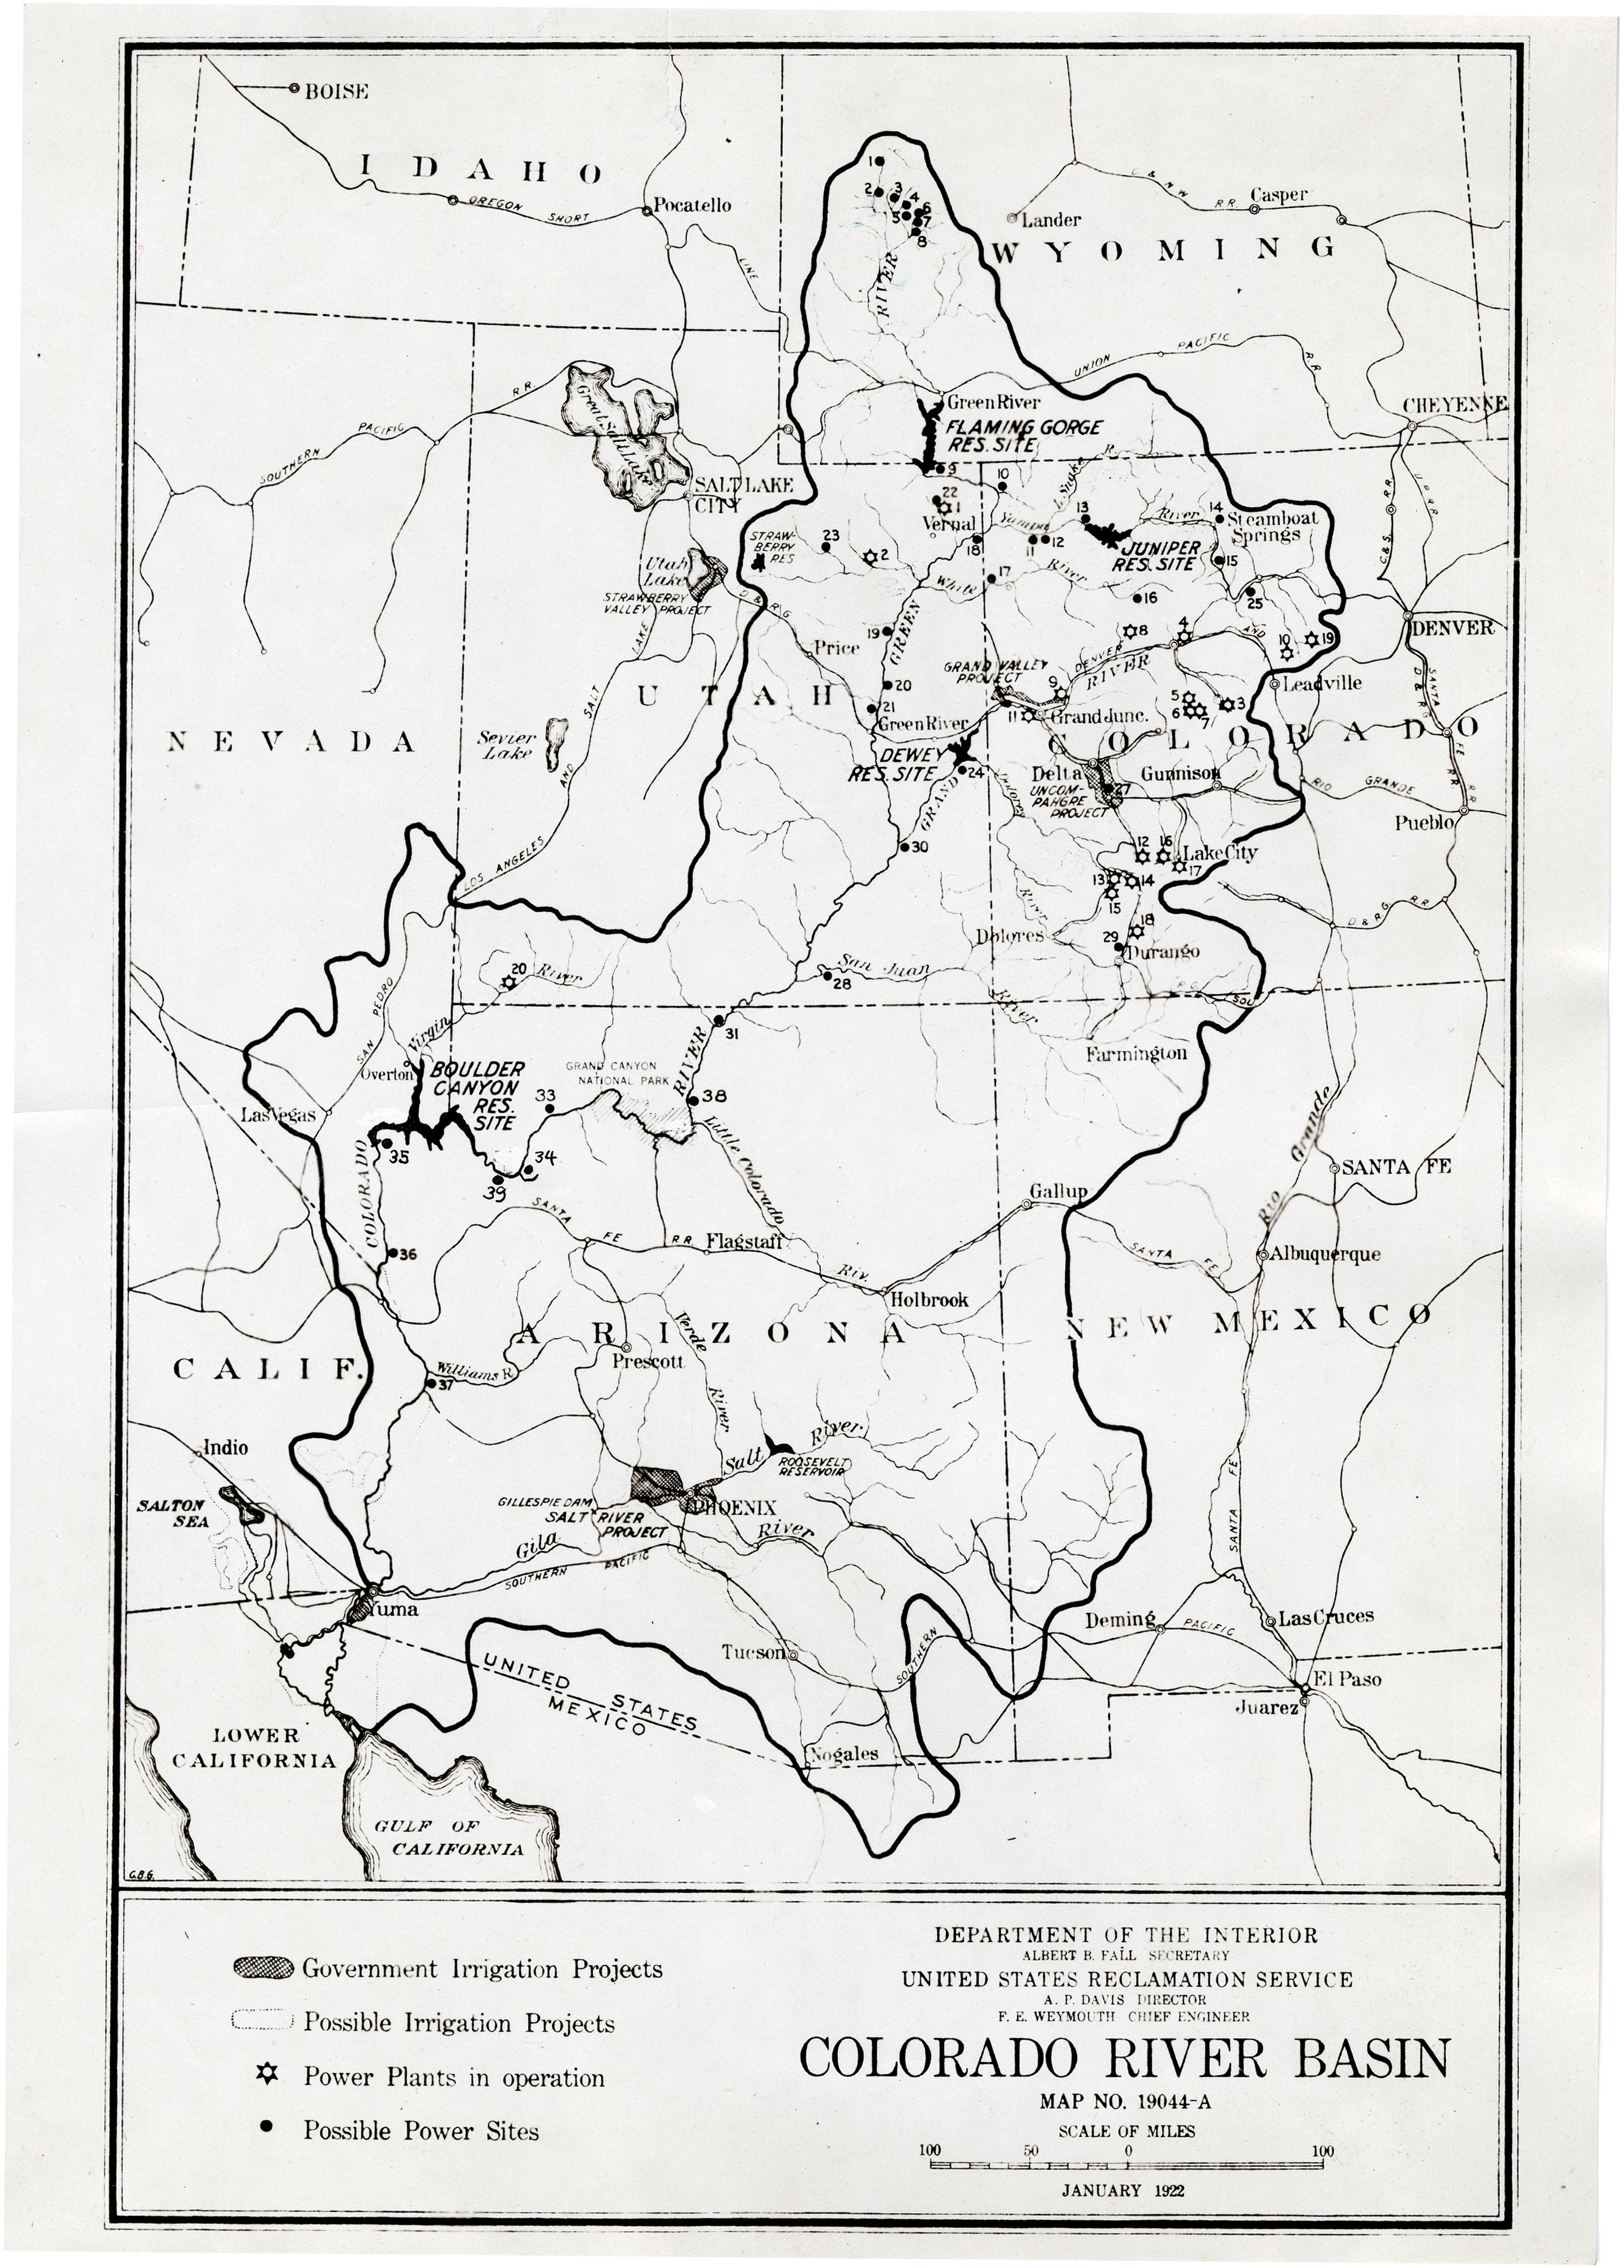 Map of the Colorado River Basin made by the Bureau of Reclamation in 1922 (series 13912).